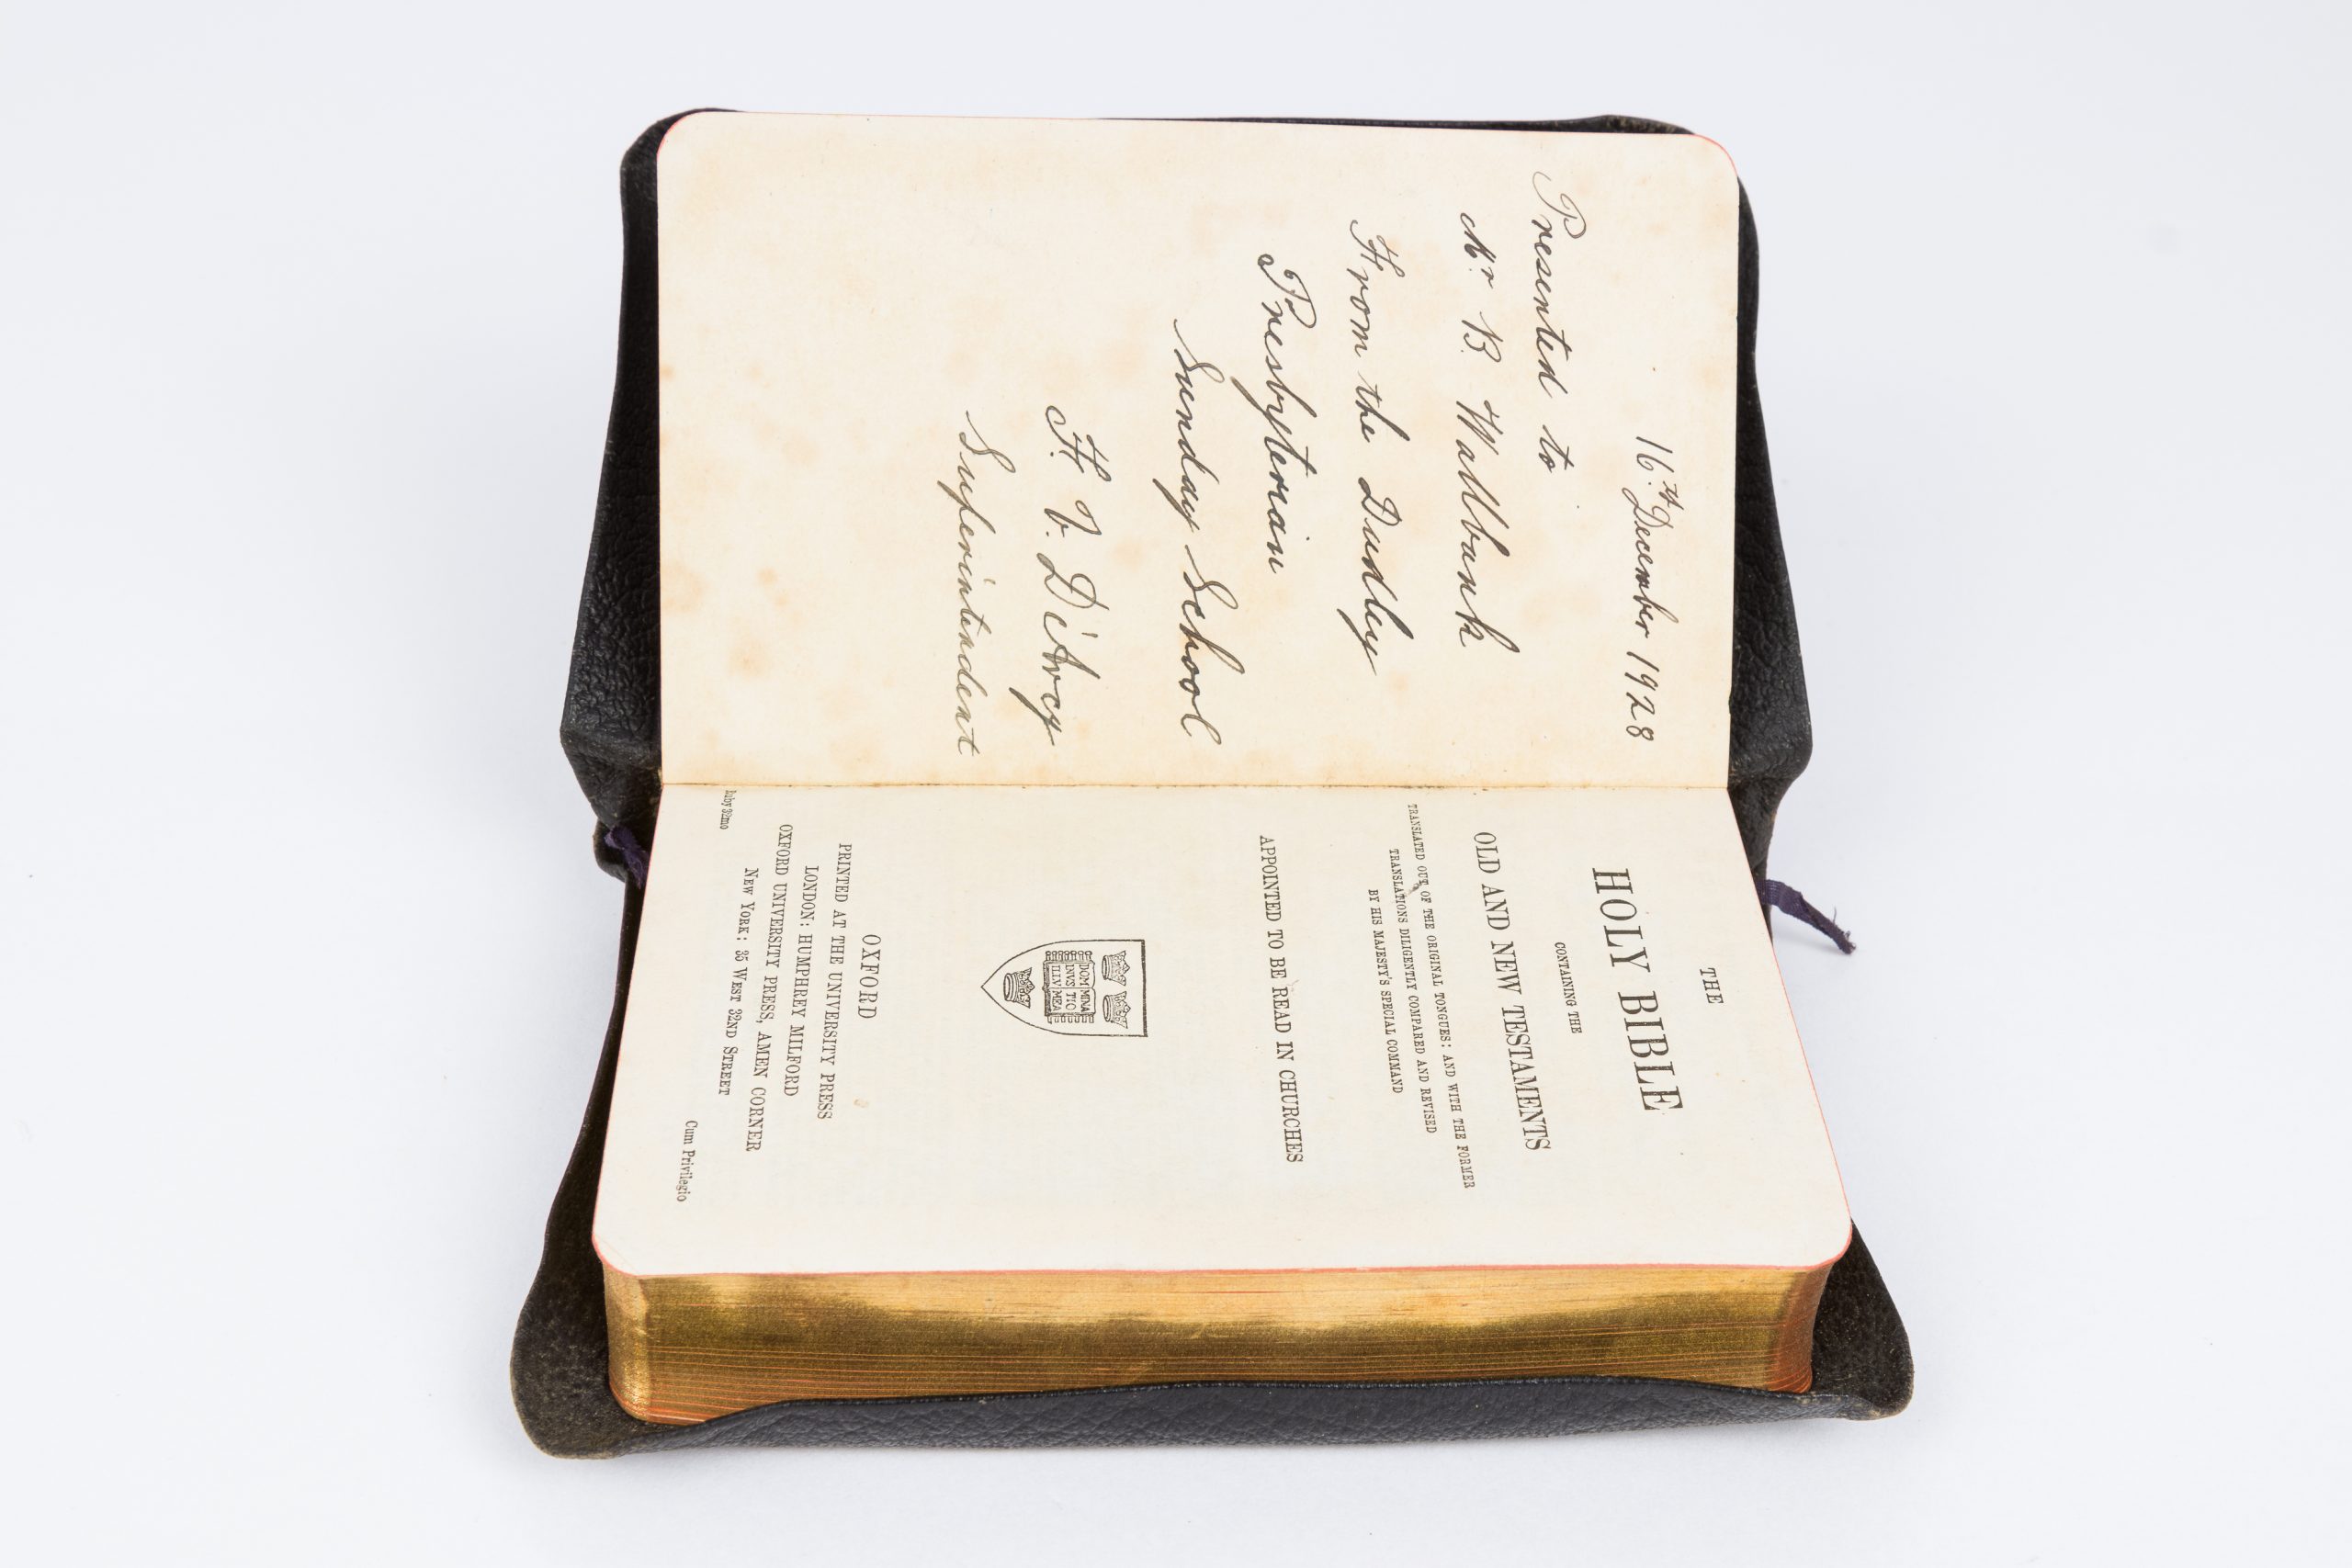 Black, leather-bound bible open to the first pages, the blank page features a handwritten inscription.